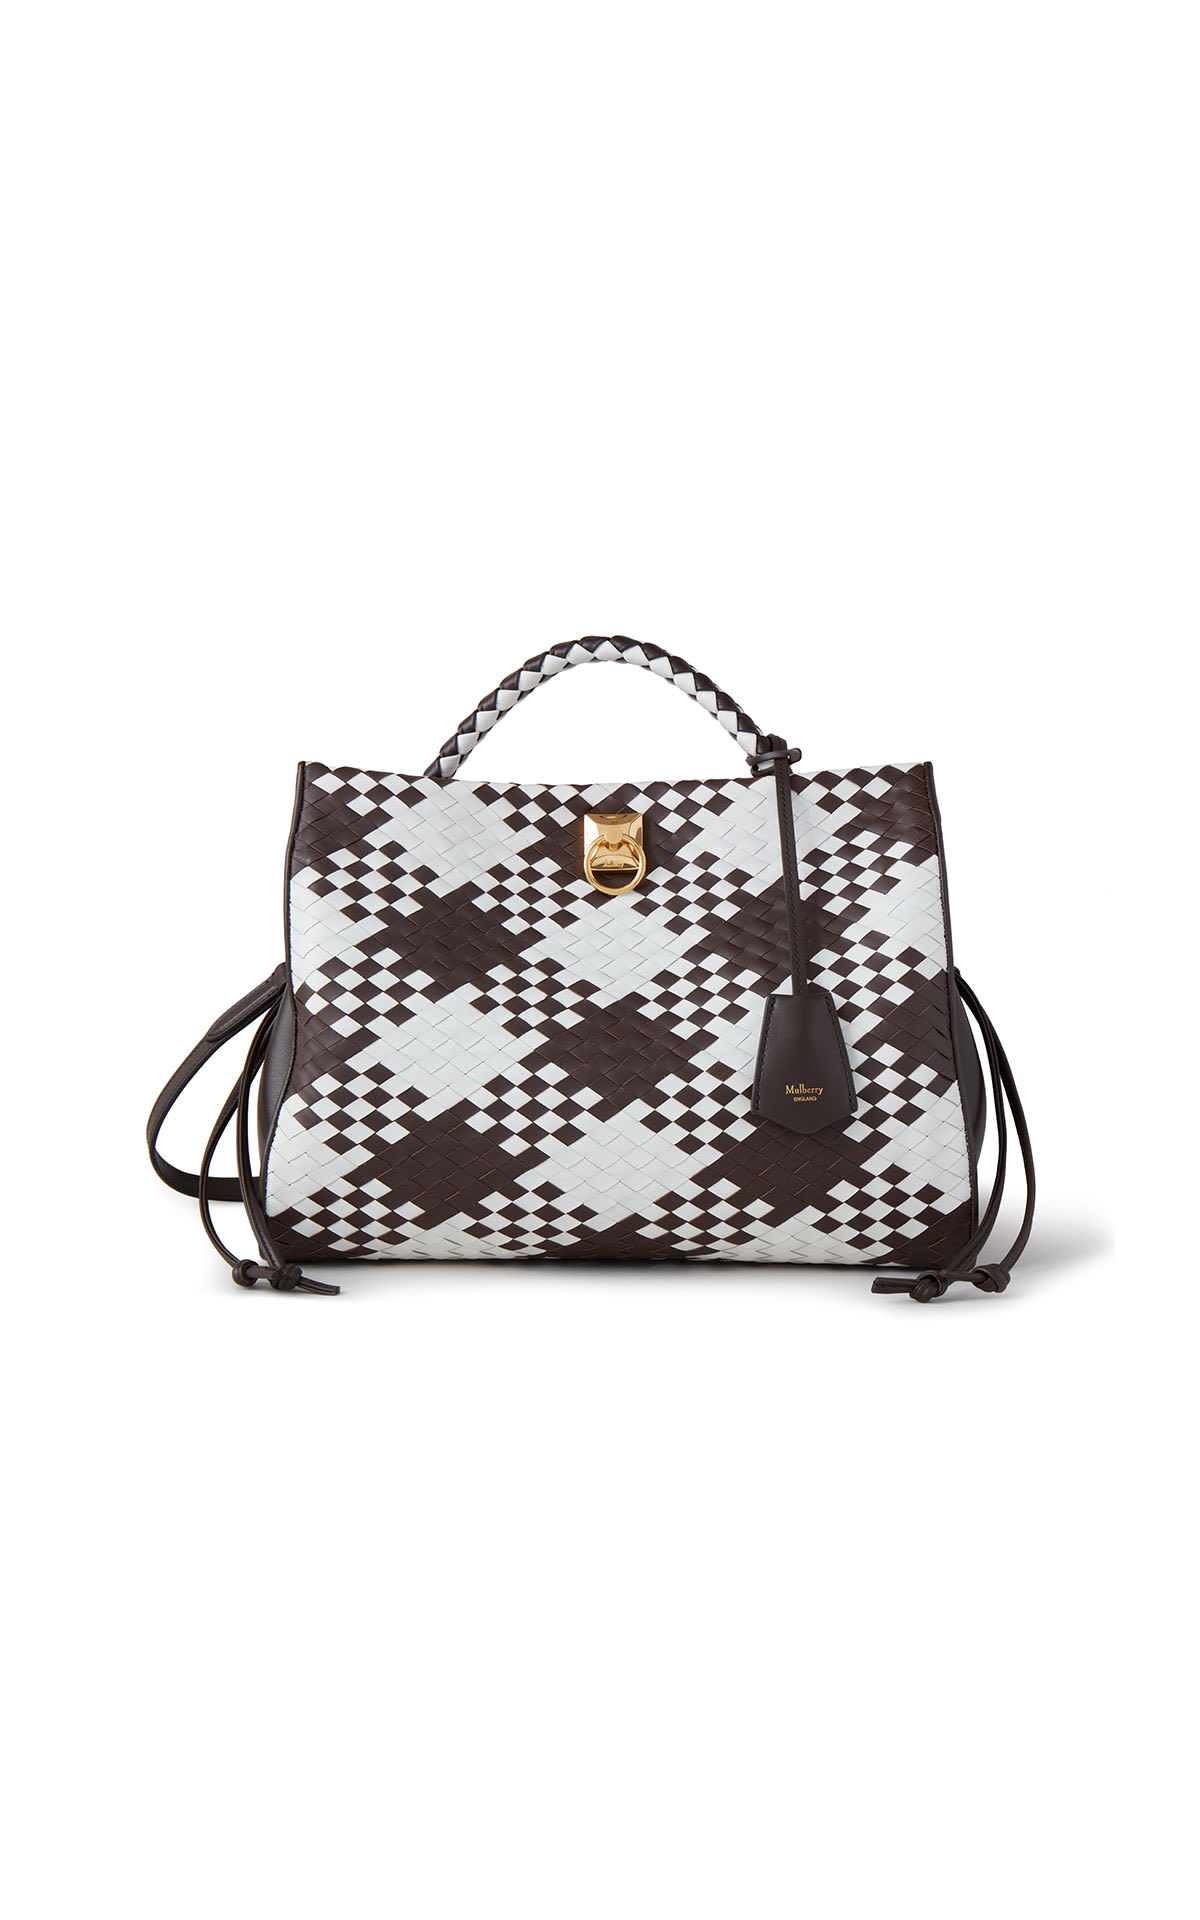 Mulberry Iris woven vichy from Bicester Village